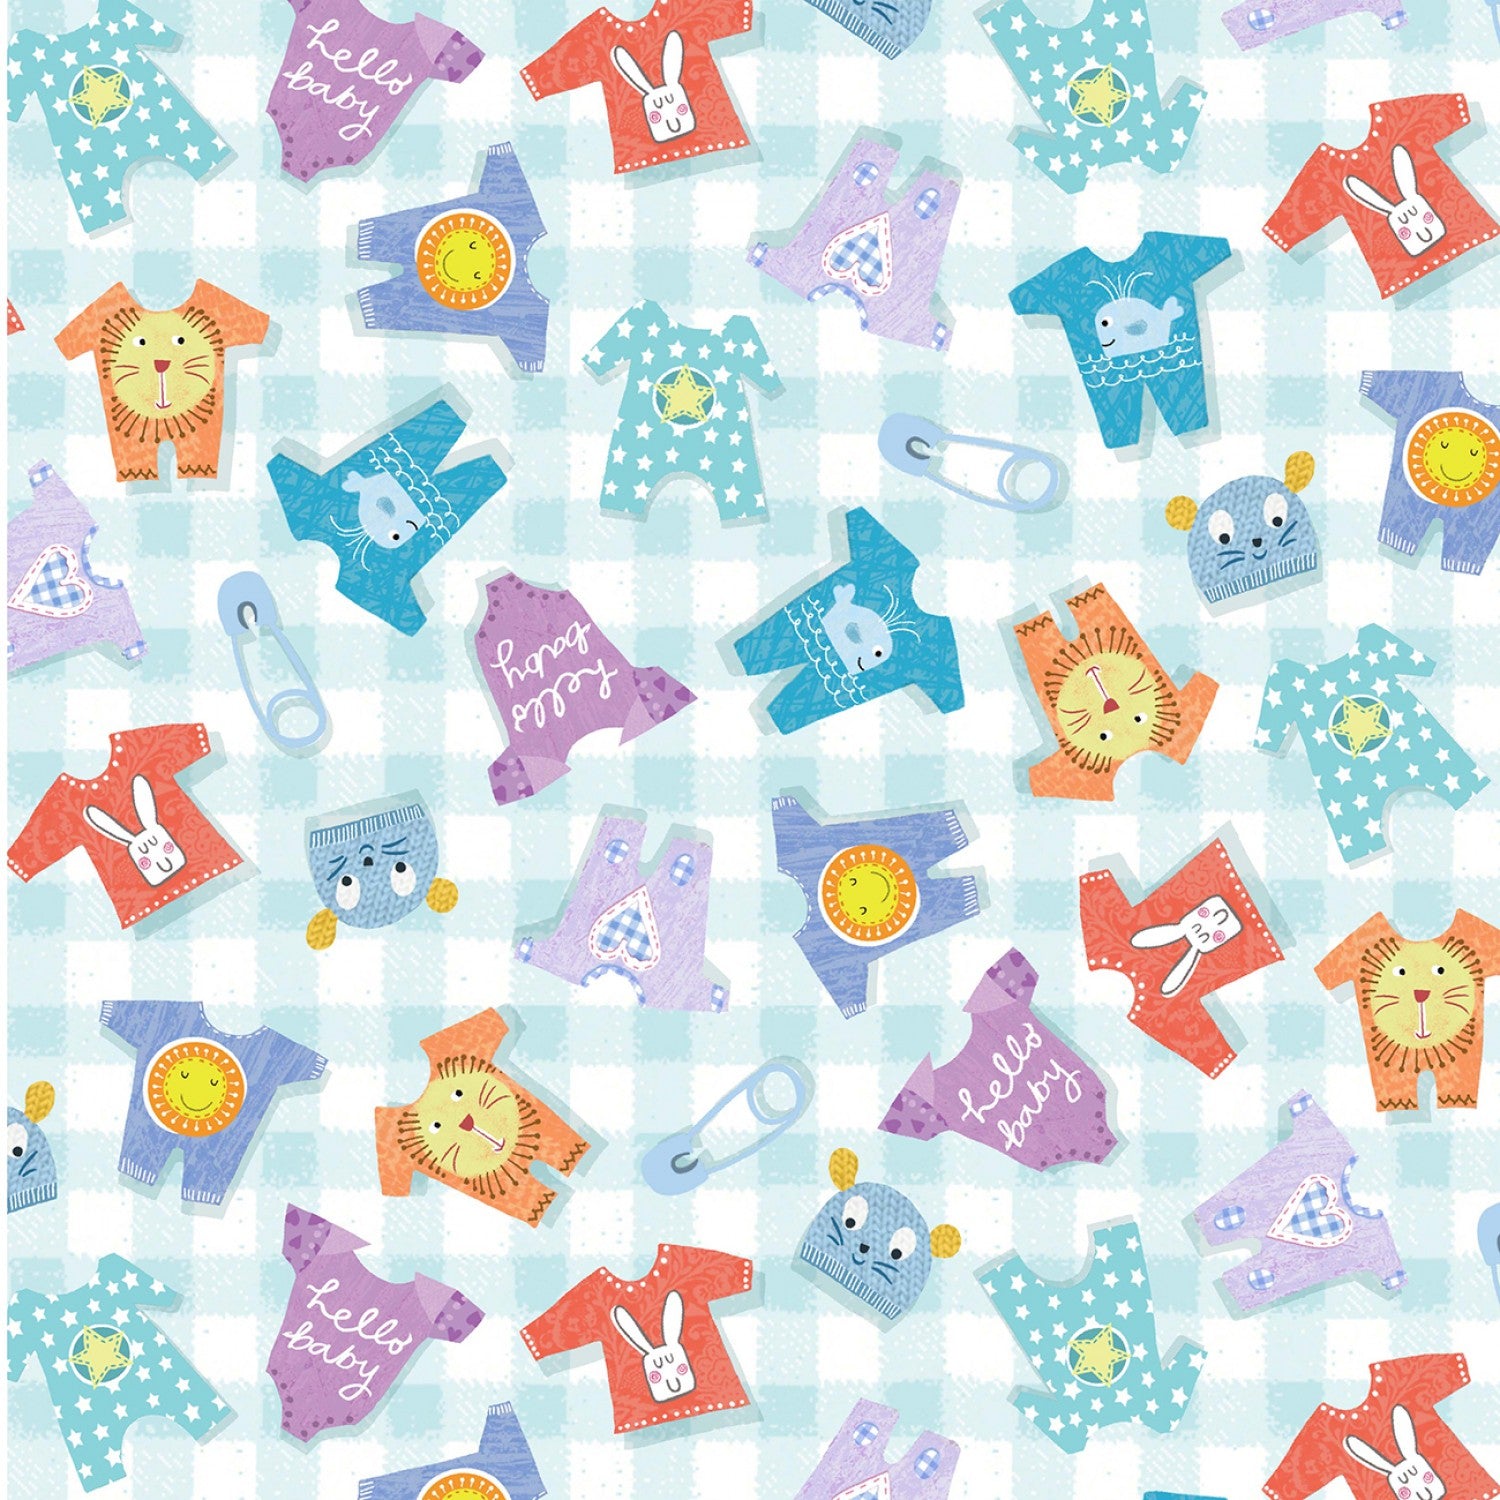 Baby Love - Blue Rompers by Tracy Cottingham for Michael Miller Fabrics